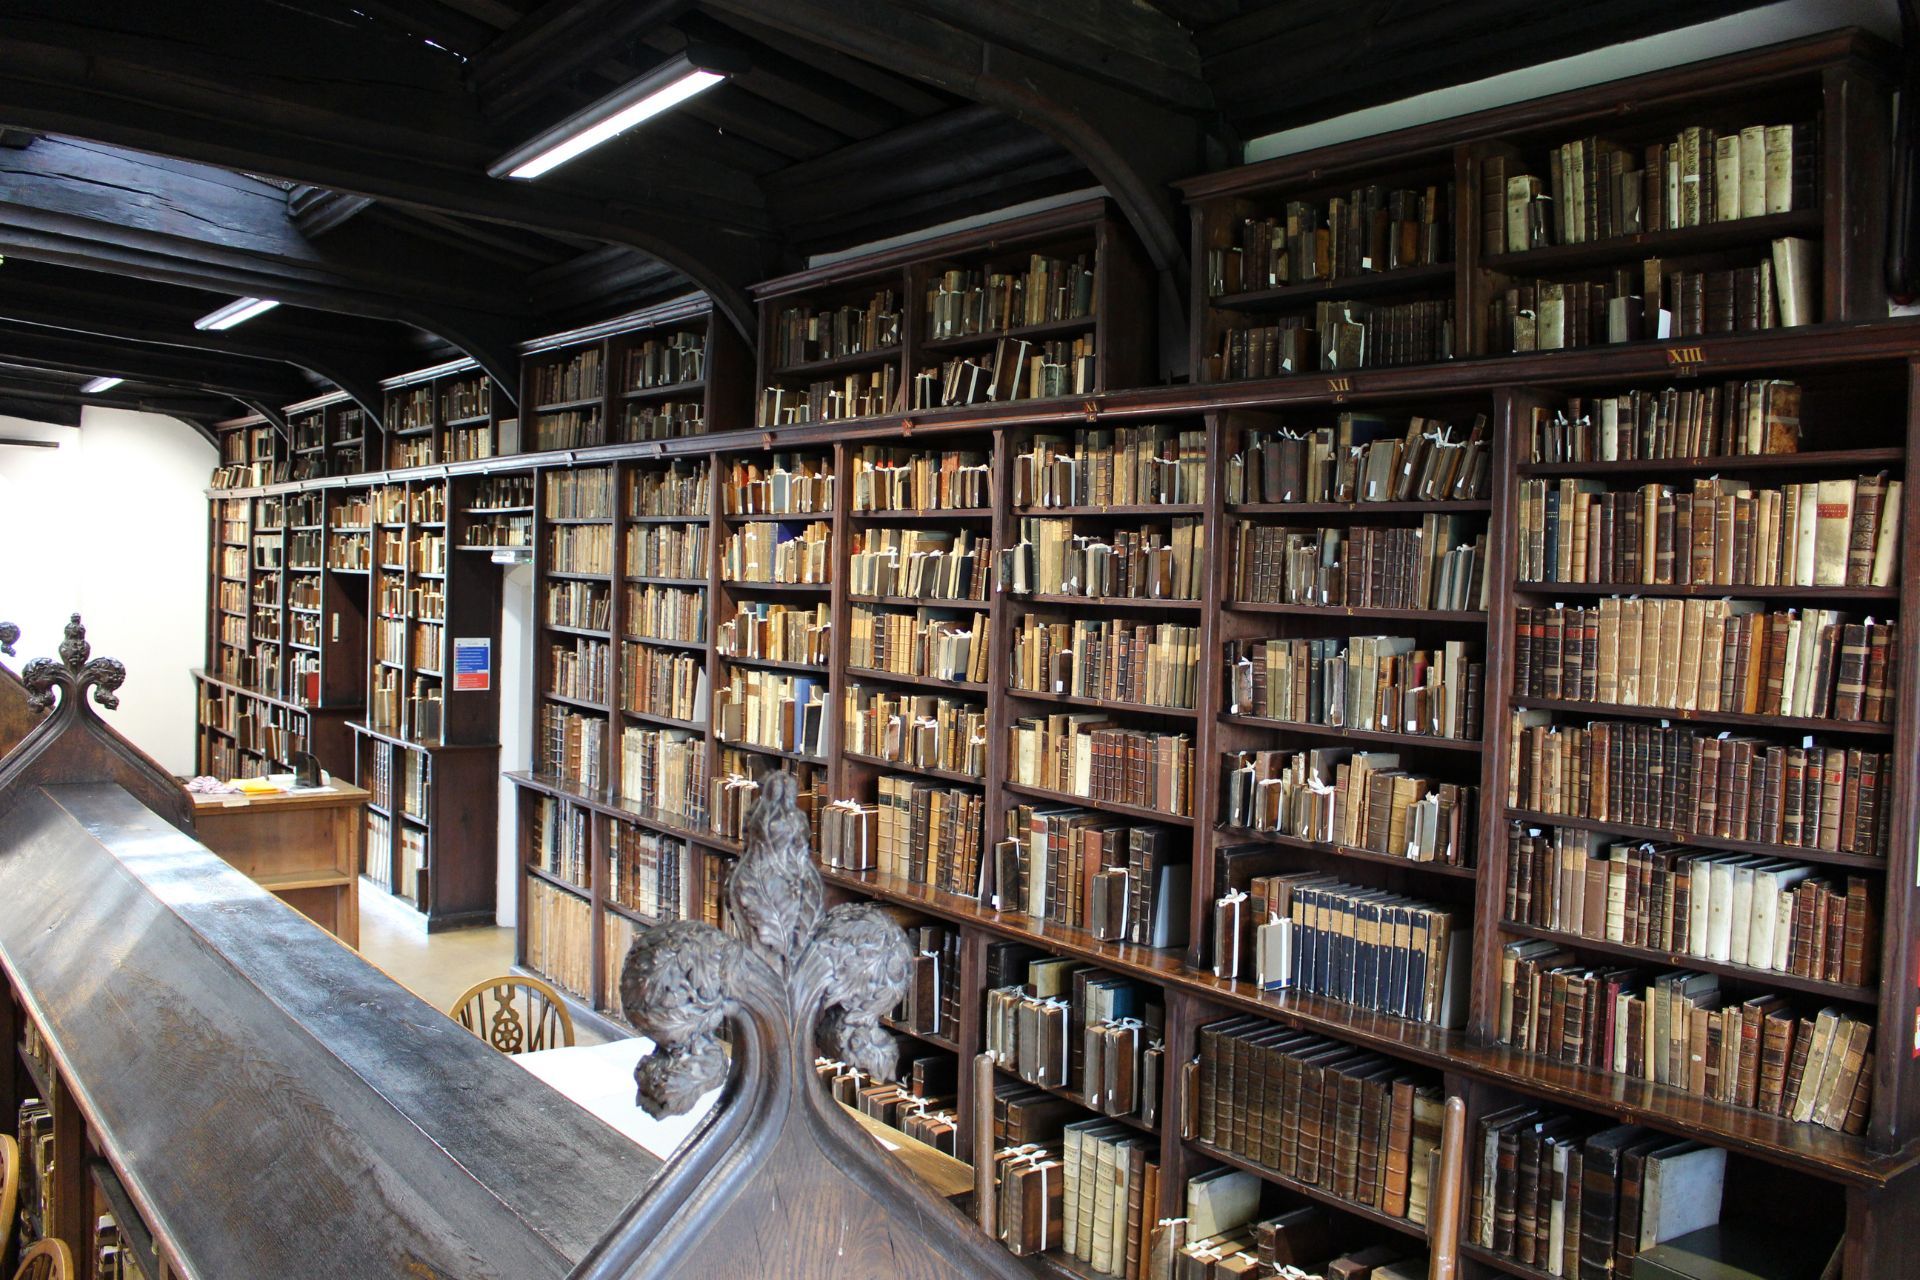 View of the bookshelves in the Routh Library in the Exchequer Building.